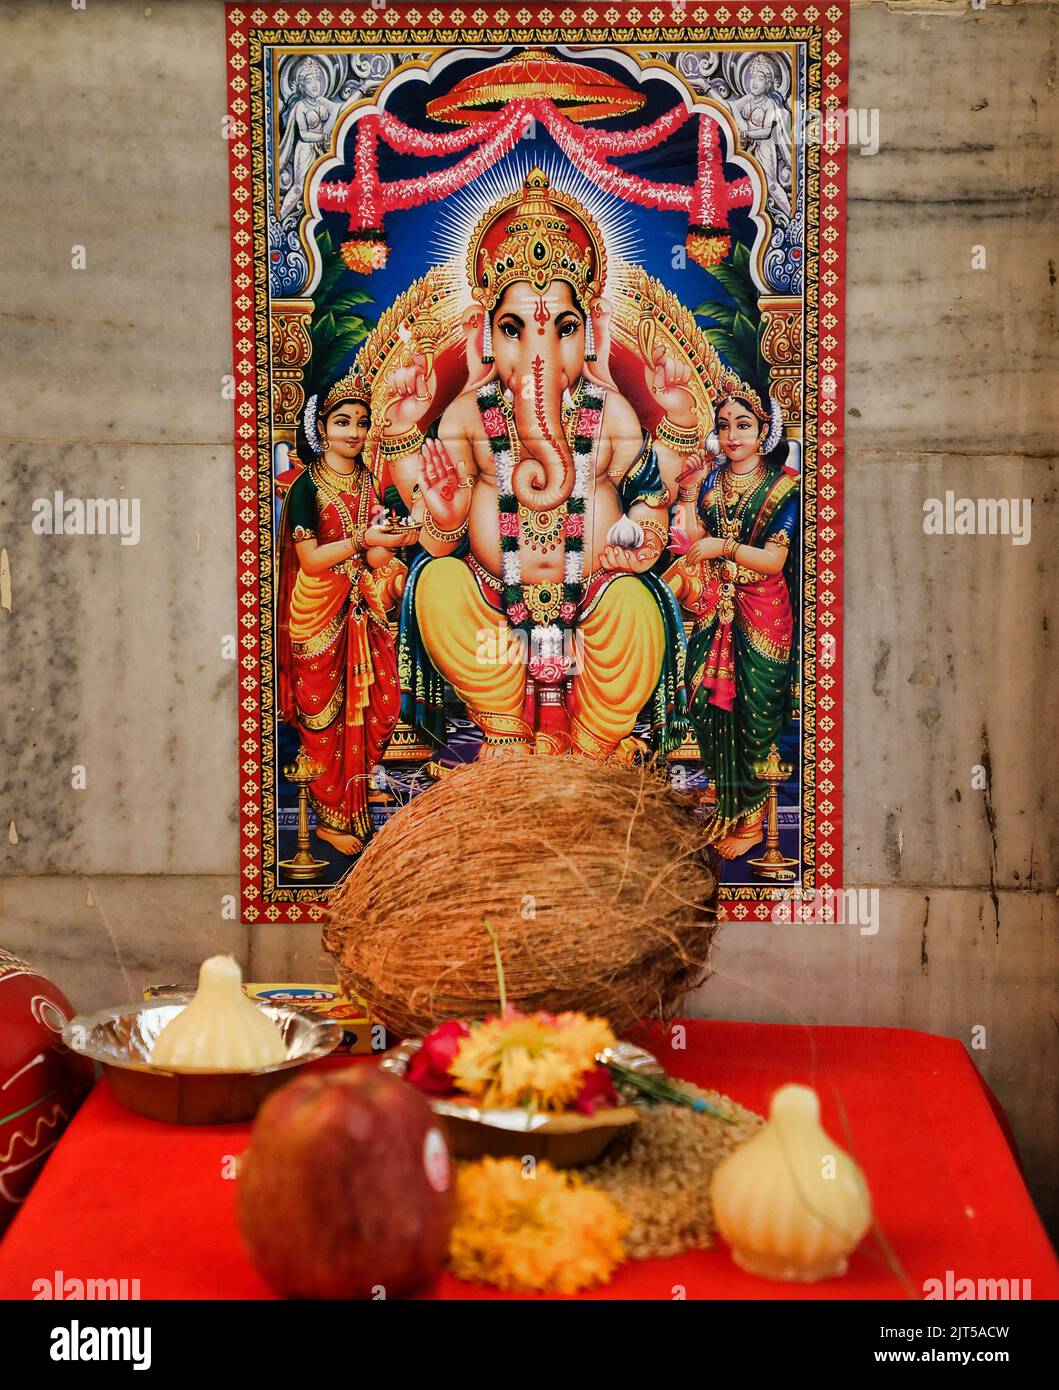 A closeup vertical shot of the God Ganesha wallpaper on the wall with a red table in front Stock Photo